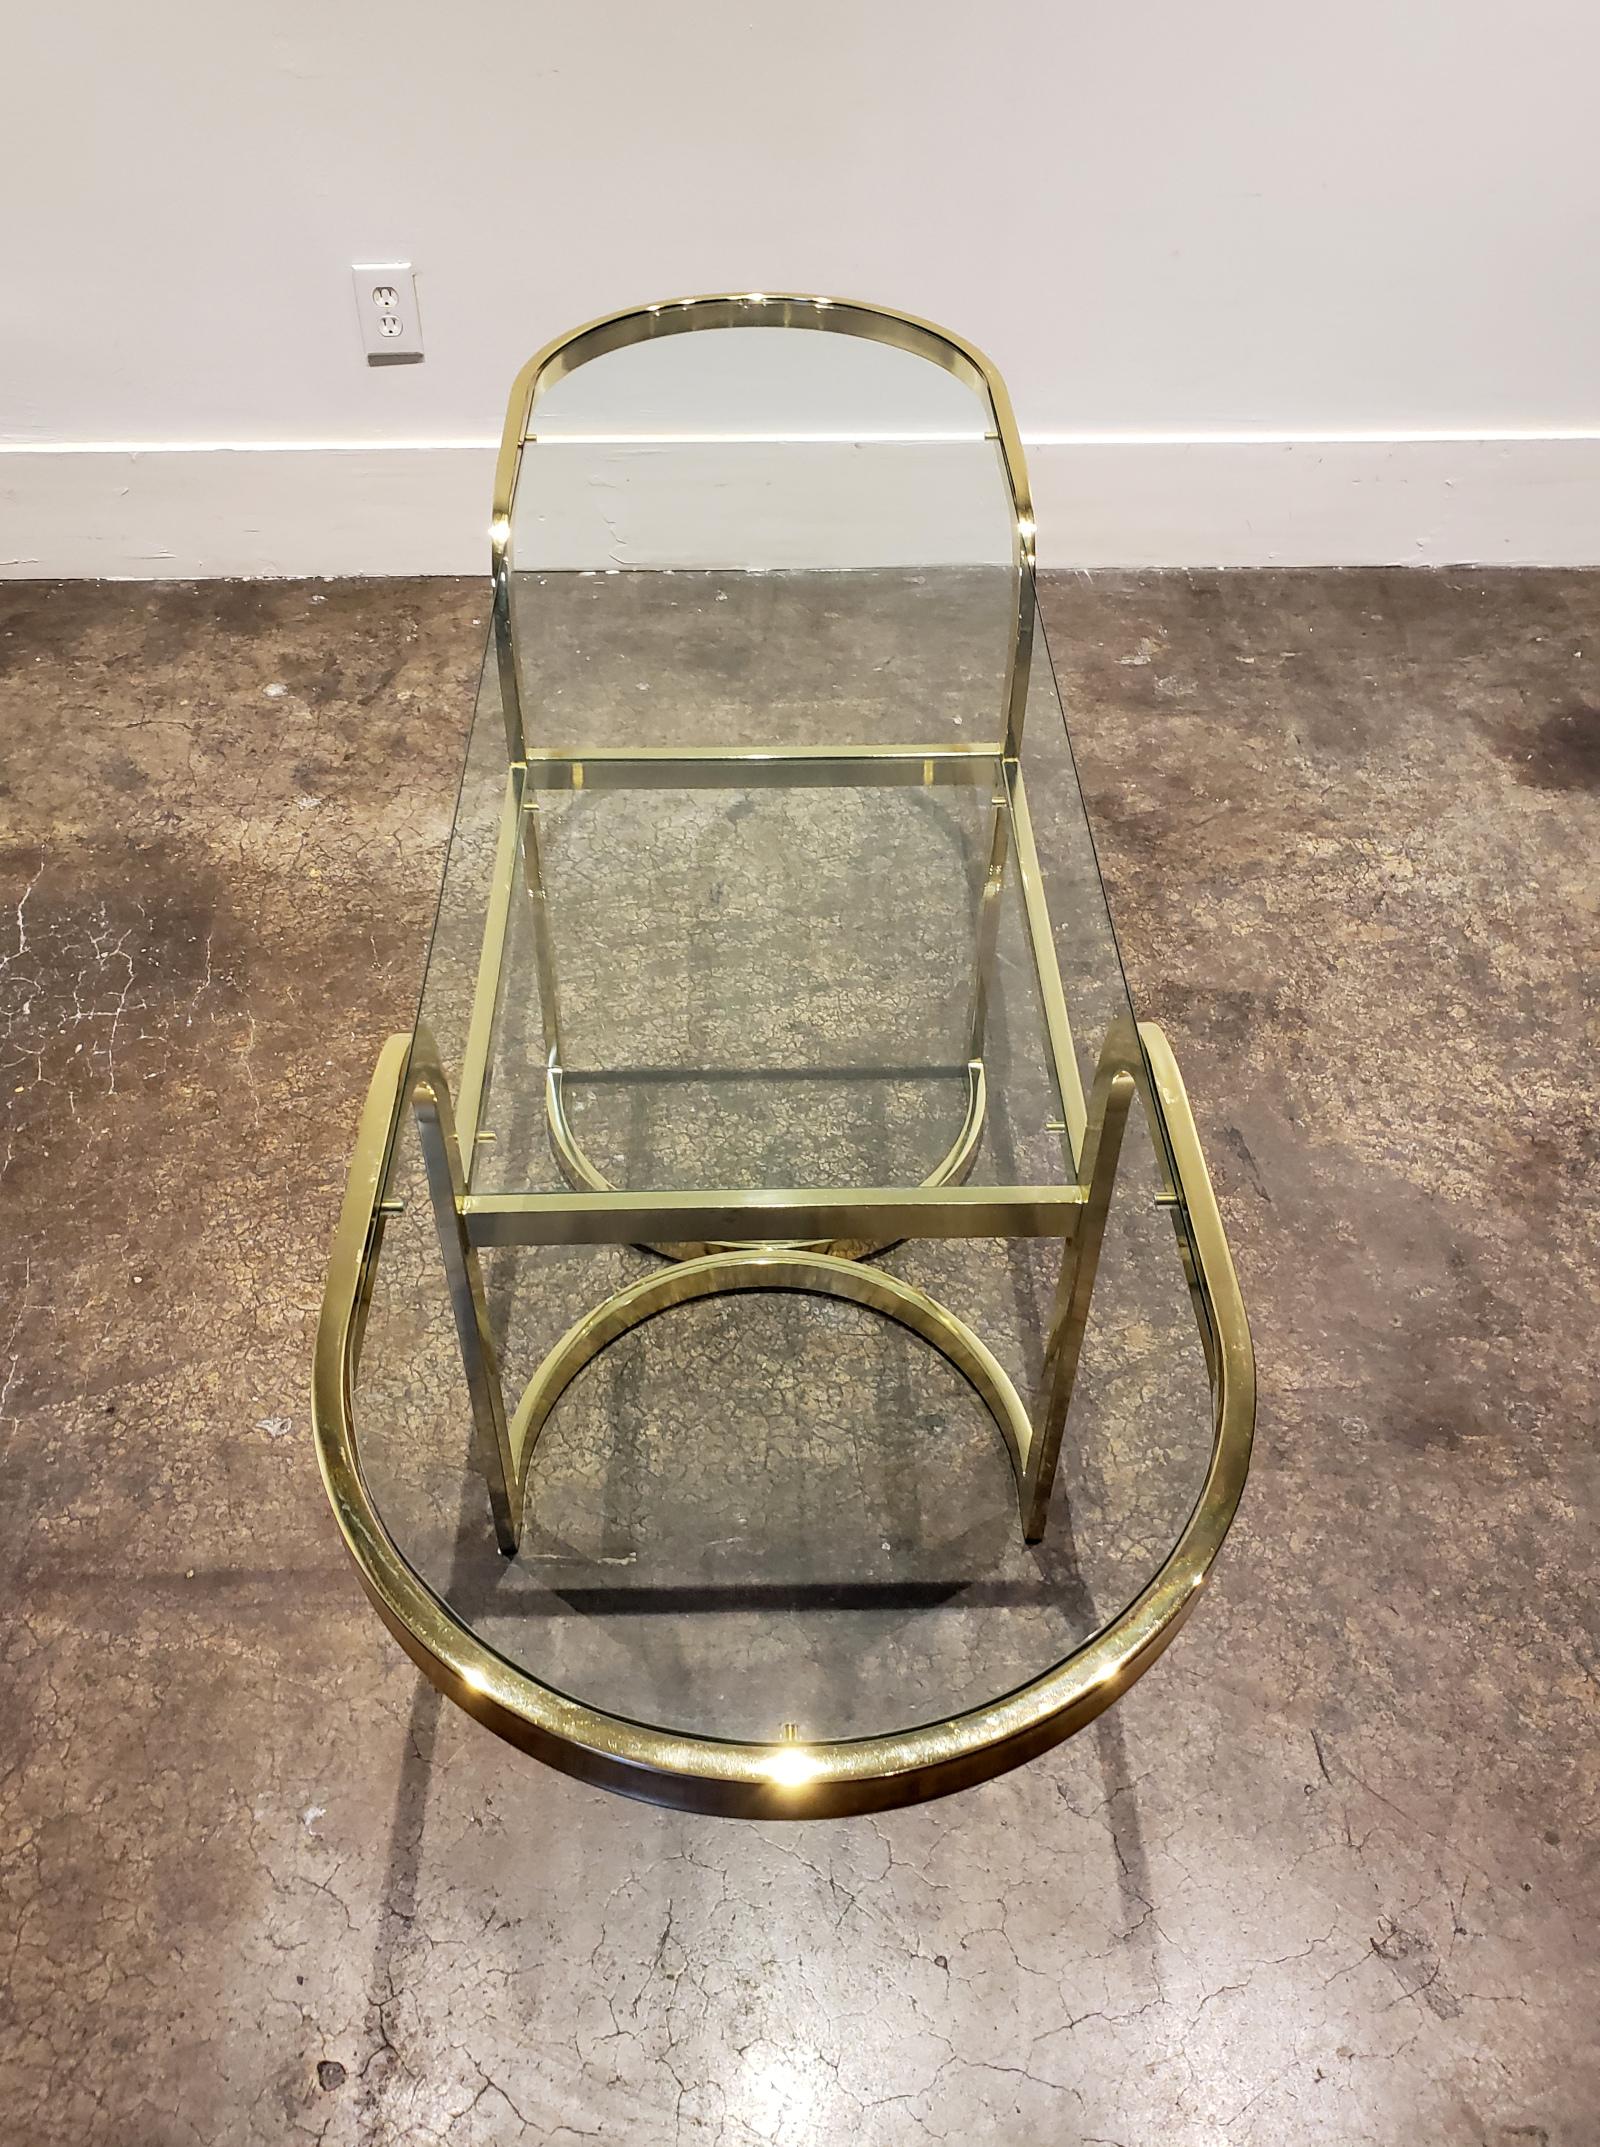 20th Century Brass Console Cafe Table with Pink Chairs by DIA Design Institute of America